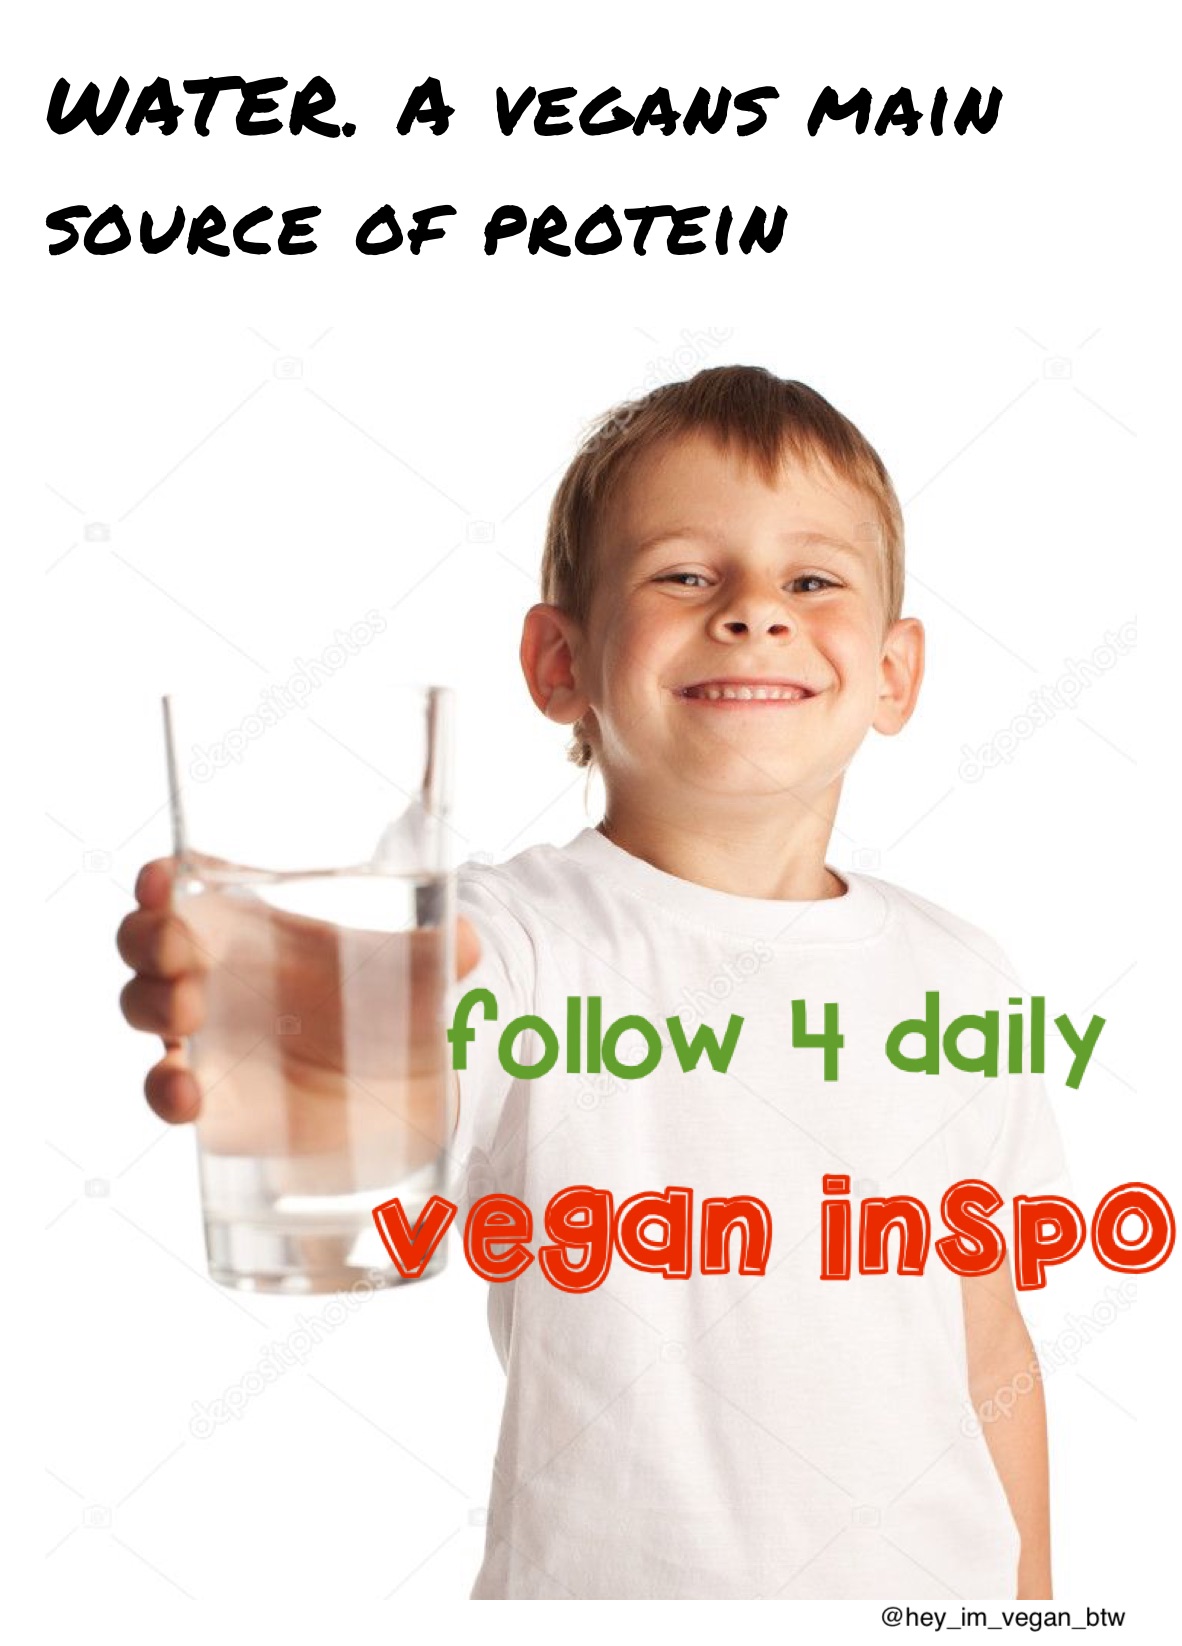 WATER. A vegans main source of protein